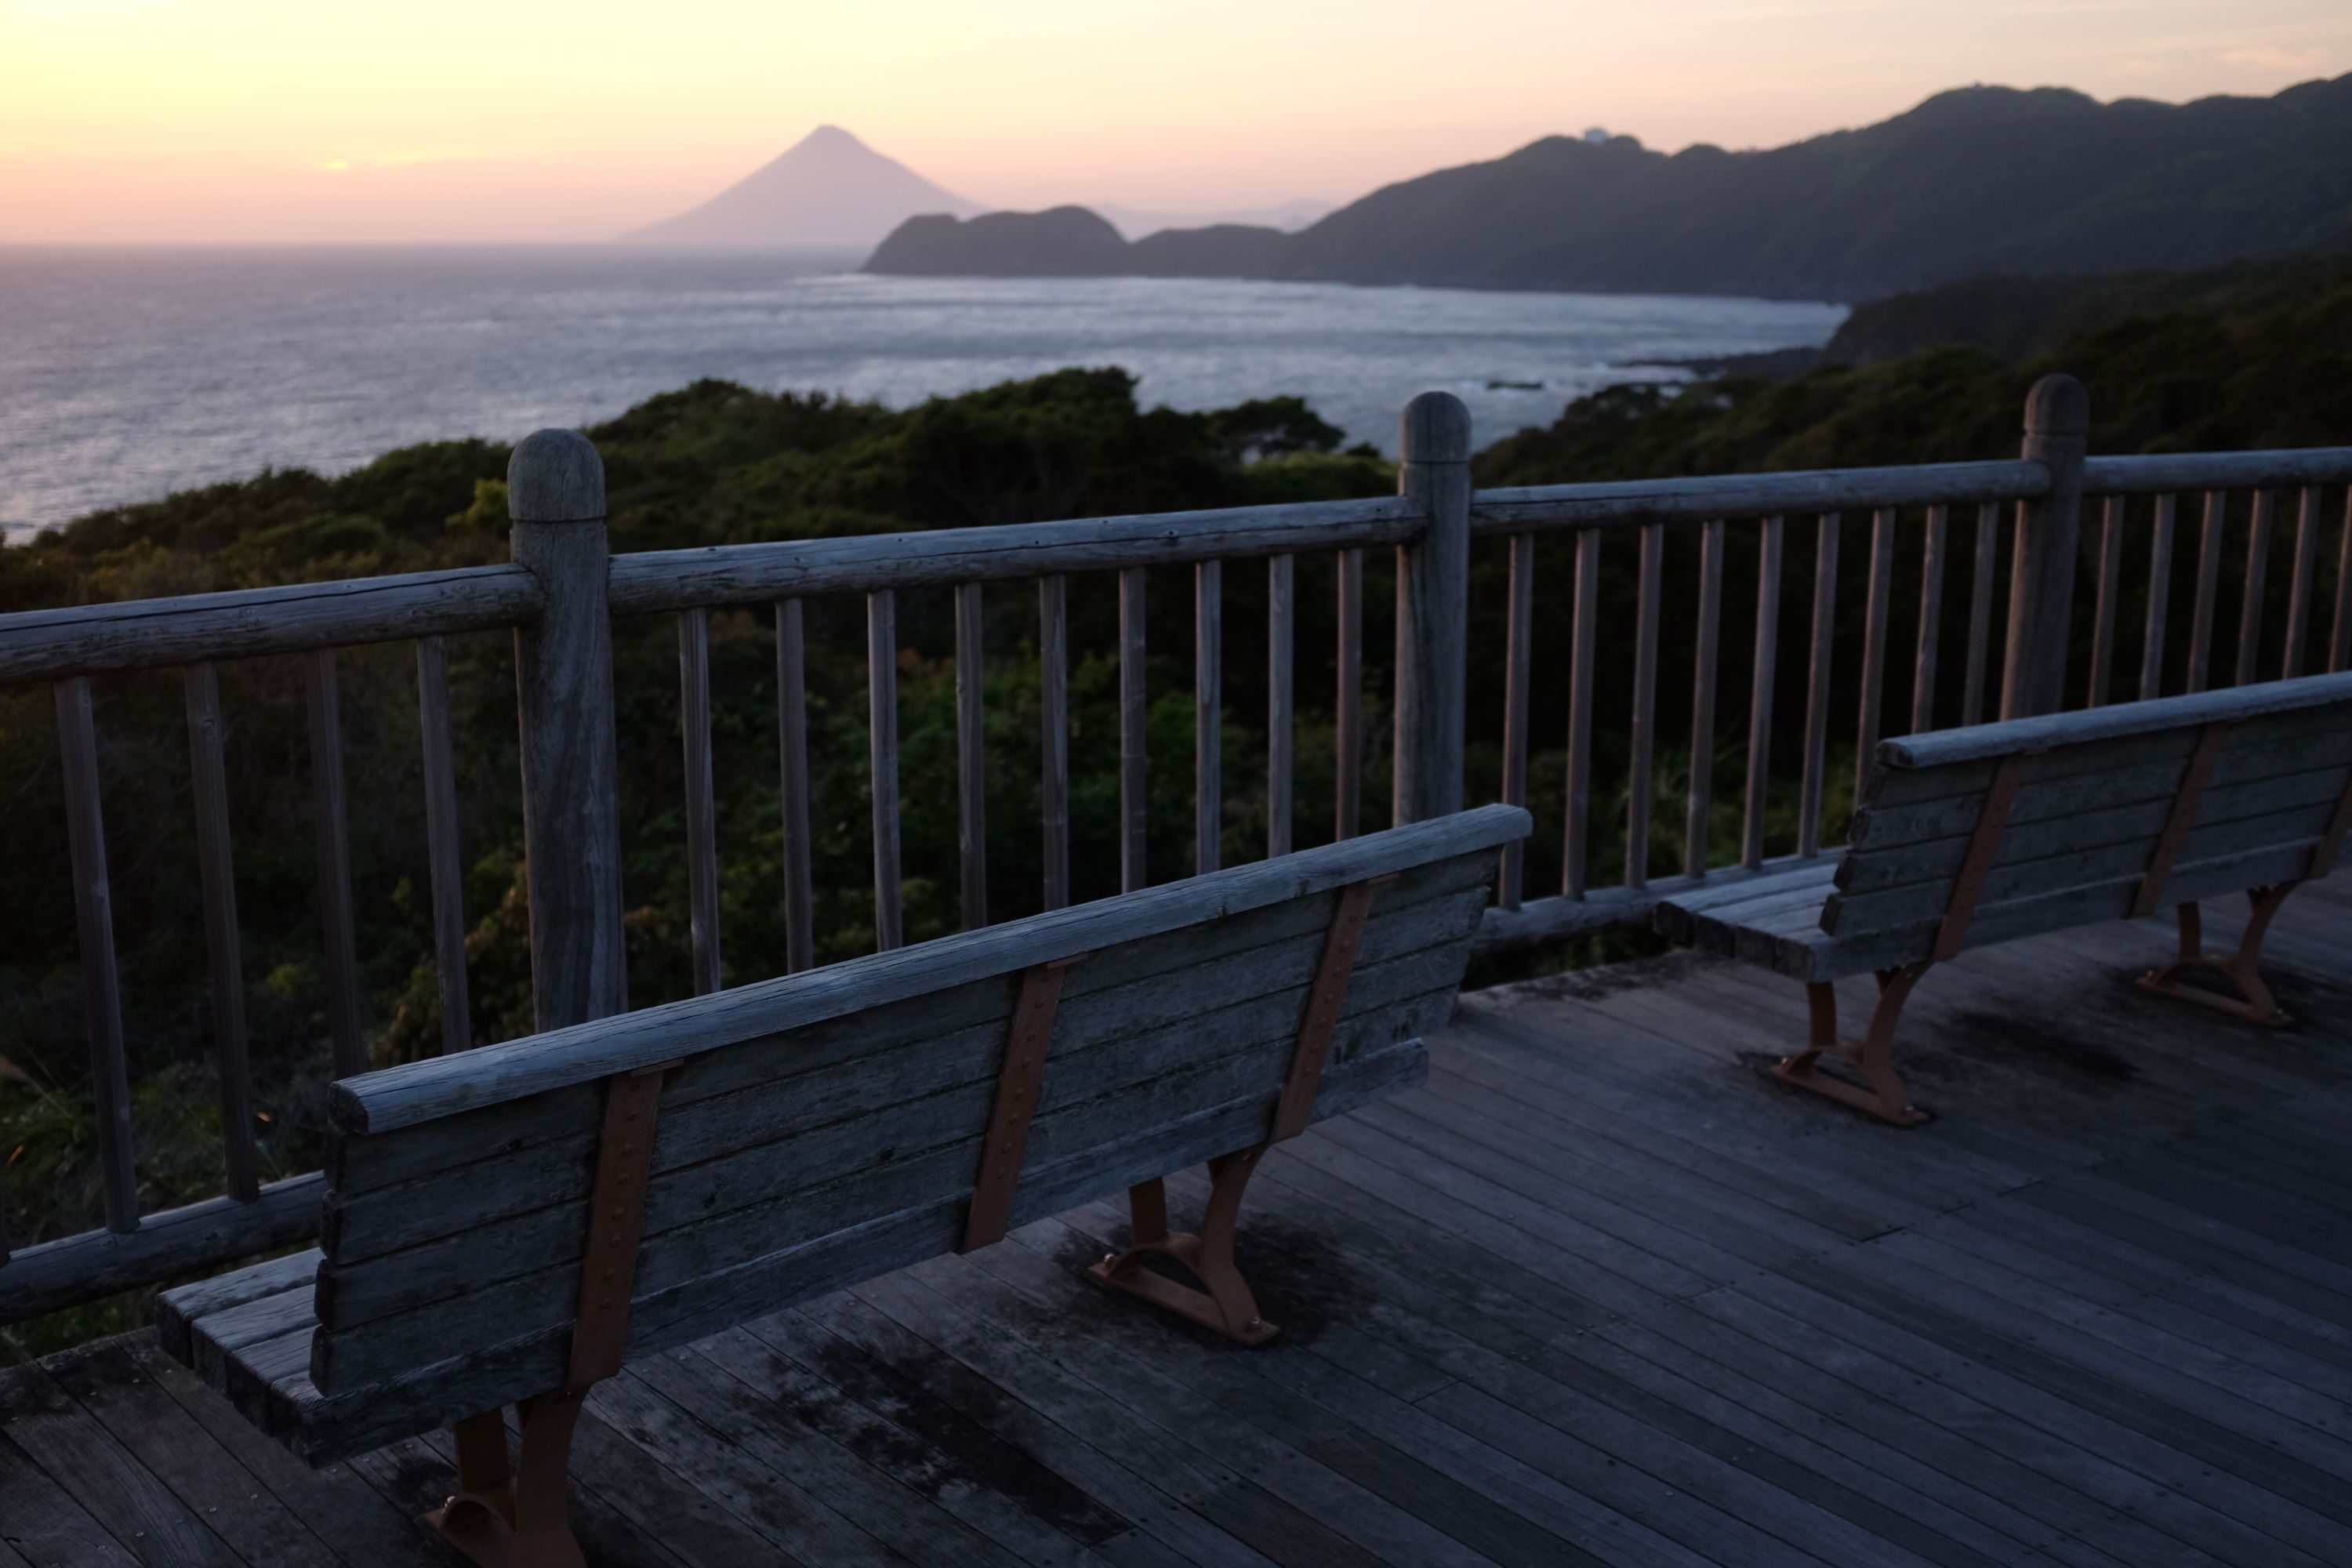 A rest stop with two benches looking out on the bay and Mount Kaimon.